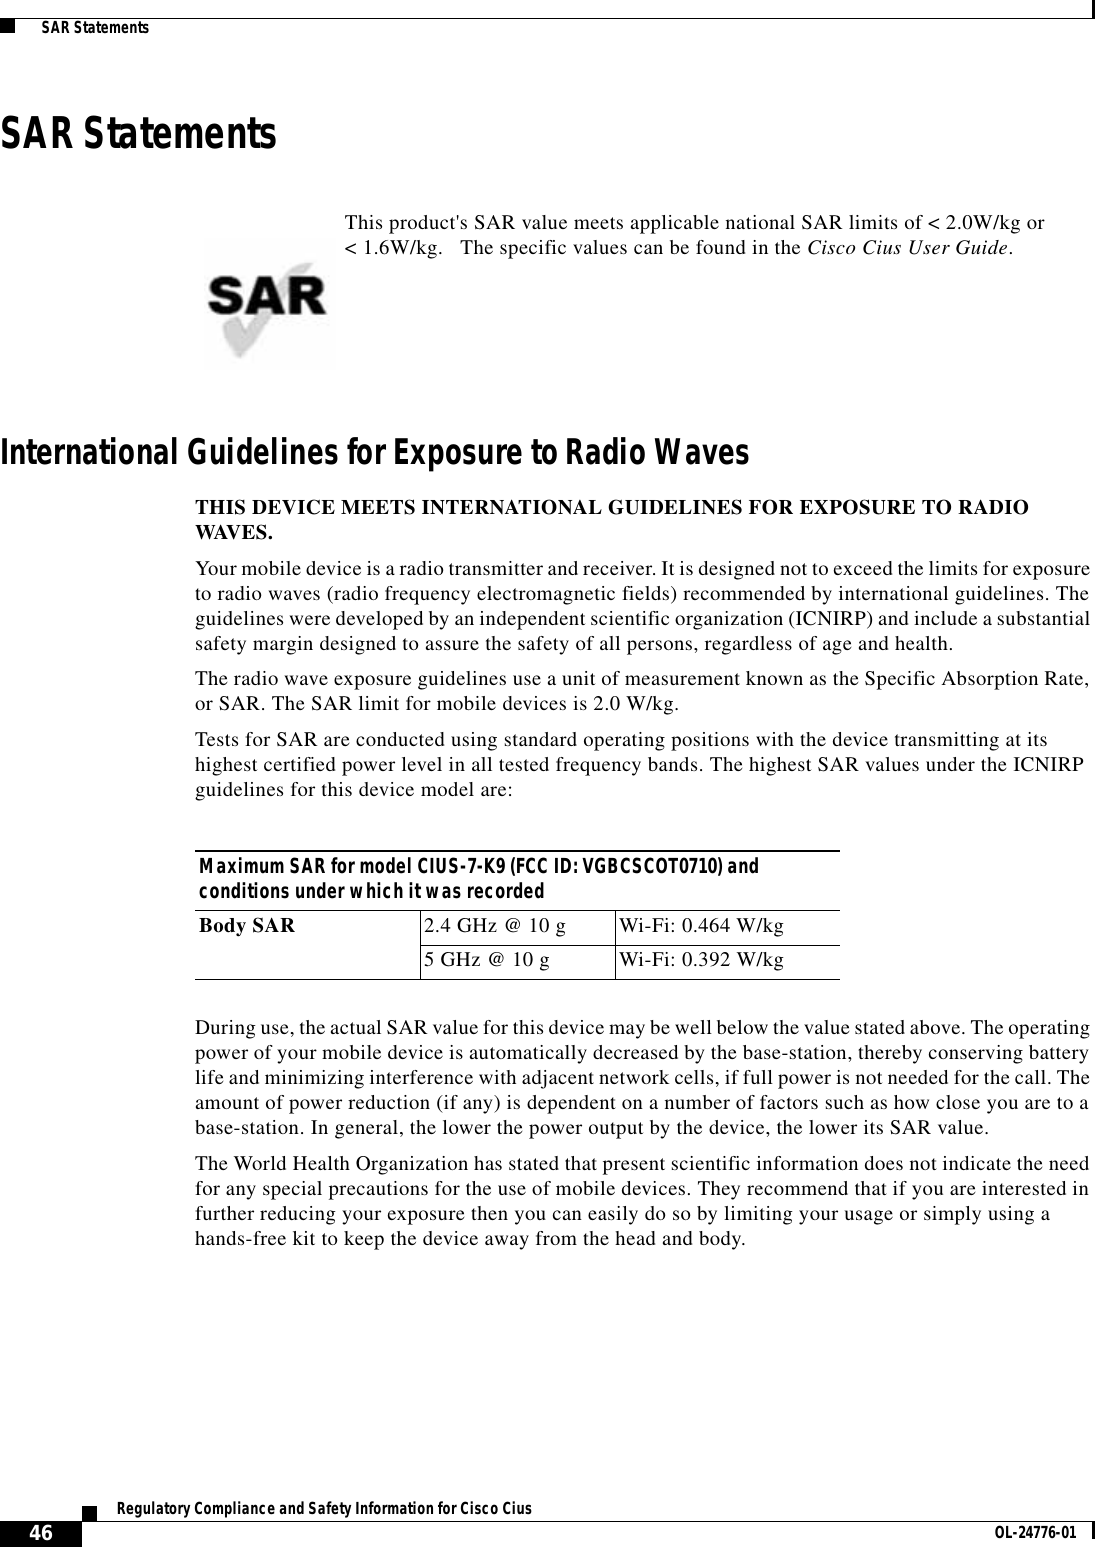  46Regulatory Compliance and Safety Information for Cisco Cius OL-24776-01  SAR StatementsSAR StatementsInternational Guidelines for Exposure to Radio WavesTHIS DEVICE MEETS INTERNATIONAL GUIDELINES FOR EXPOSURE TO RADIO WAVES.Your mobile device is a radio transmitter and receiver. It is designed not to exceed the limits for exposure to radio waves (radio frequency electromagnetic fields) recommended by international guidelines. The guidelines were developed by an independent scientific organization (ICNIRP) and include a substantial safety margin designed to assure the safety of all persons, regardless of age and health.The radio wave exposure guidelines use a unit of measurement known as the Specific Absorption Rate, or SAR. The SAR limit for mobile devices is 2.0 W/kg.Tests for SAR are conducted using standard operating positions with the device transmitting at its highest certified power level in all tested frequency bands. The highest SAR values under the ICNIRP guidelines for this device model are:During use, the actual SAR value for this device may be well below the value stated above. The operating power of your mobile device is automatically decreased by the base-station, thereby conserving battery life and minimizing interference with adjacent network cells, if full power is not needed for the call. The amount of power reduction (if any) is dependent on a number of factors such as how close you are to a base-station. In general, the lower the power output by the device, the lower its SAR value.The World Health Organization has stated that present scientific information does not indicate the need for any special precautions for the use of mobile devices. They recommend that if you are interested in further reducing your exposure then you can easily do so by limiting your usage or simply using a hands-free kit to keep the device away from the head and body.This product&apos;s SAR value meets applicable national SAR limits of &lt; 2.0W/kg or &lt; 1.6W/kg.   The specific values can be found in the Cisco Cius User Guide.Maximum SAR for model CIUS-7-K9 (FCC ID: VGBCSCOT0710) and conditions under which it was recordedBody SAR 2.4 GHz @ 10 g Wi-Fi: 0.464 W/kg5 GHz @ 10 g Wi-Fi: 0.392 W/kg